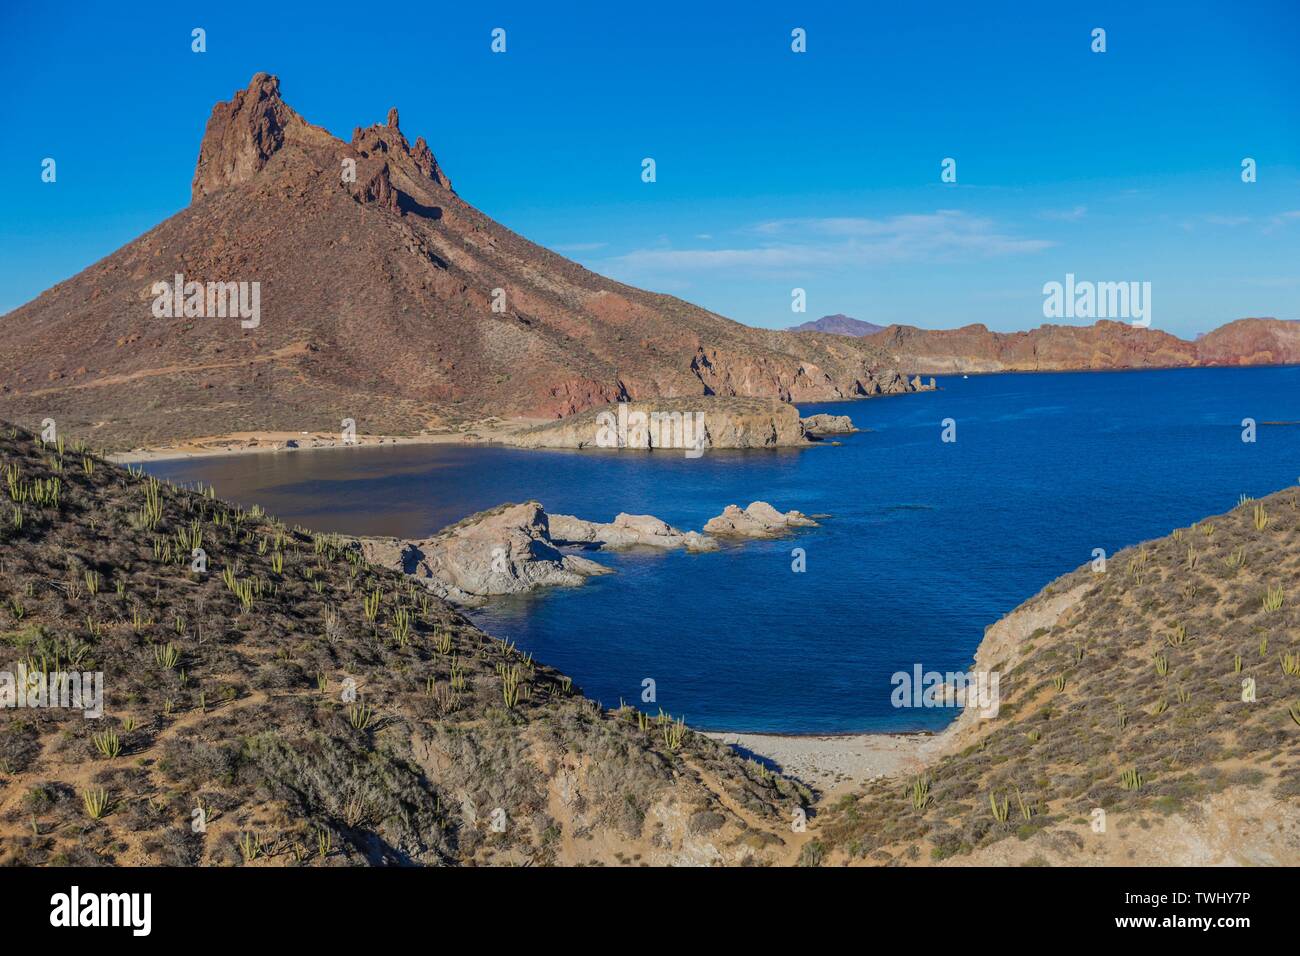 San Carlos, Sonora Mexico. (Photo: LuisGutierrez / NortePhoto.com)  The Tetakawi hill is located on the shores of the Sea of Cortez within the San Carlos police station, Guaymas, Sonora. Besides being one of the main attractions of the place, the stone building was an important ancient center where the Yaqui, Seri and Guaymas Indians survived Stock Photo